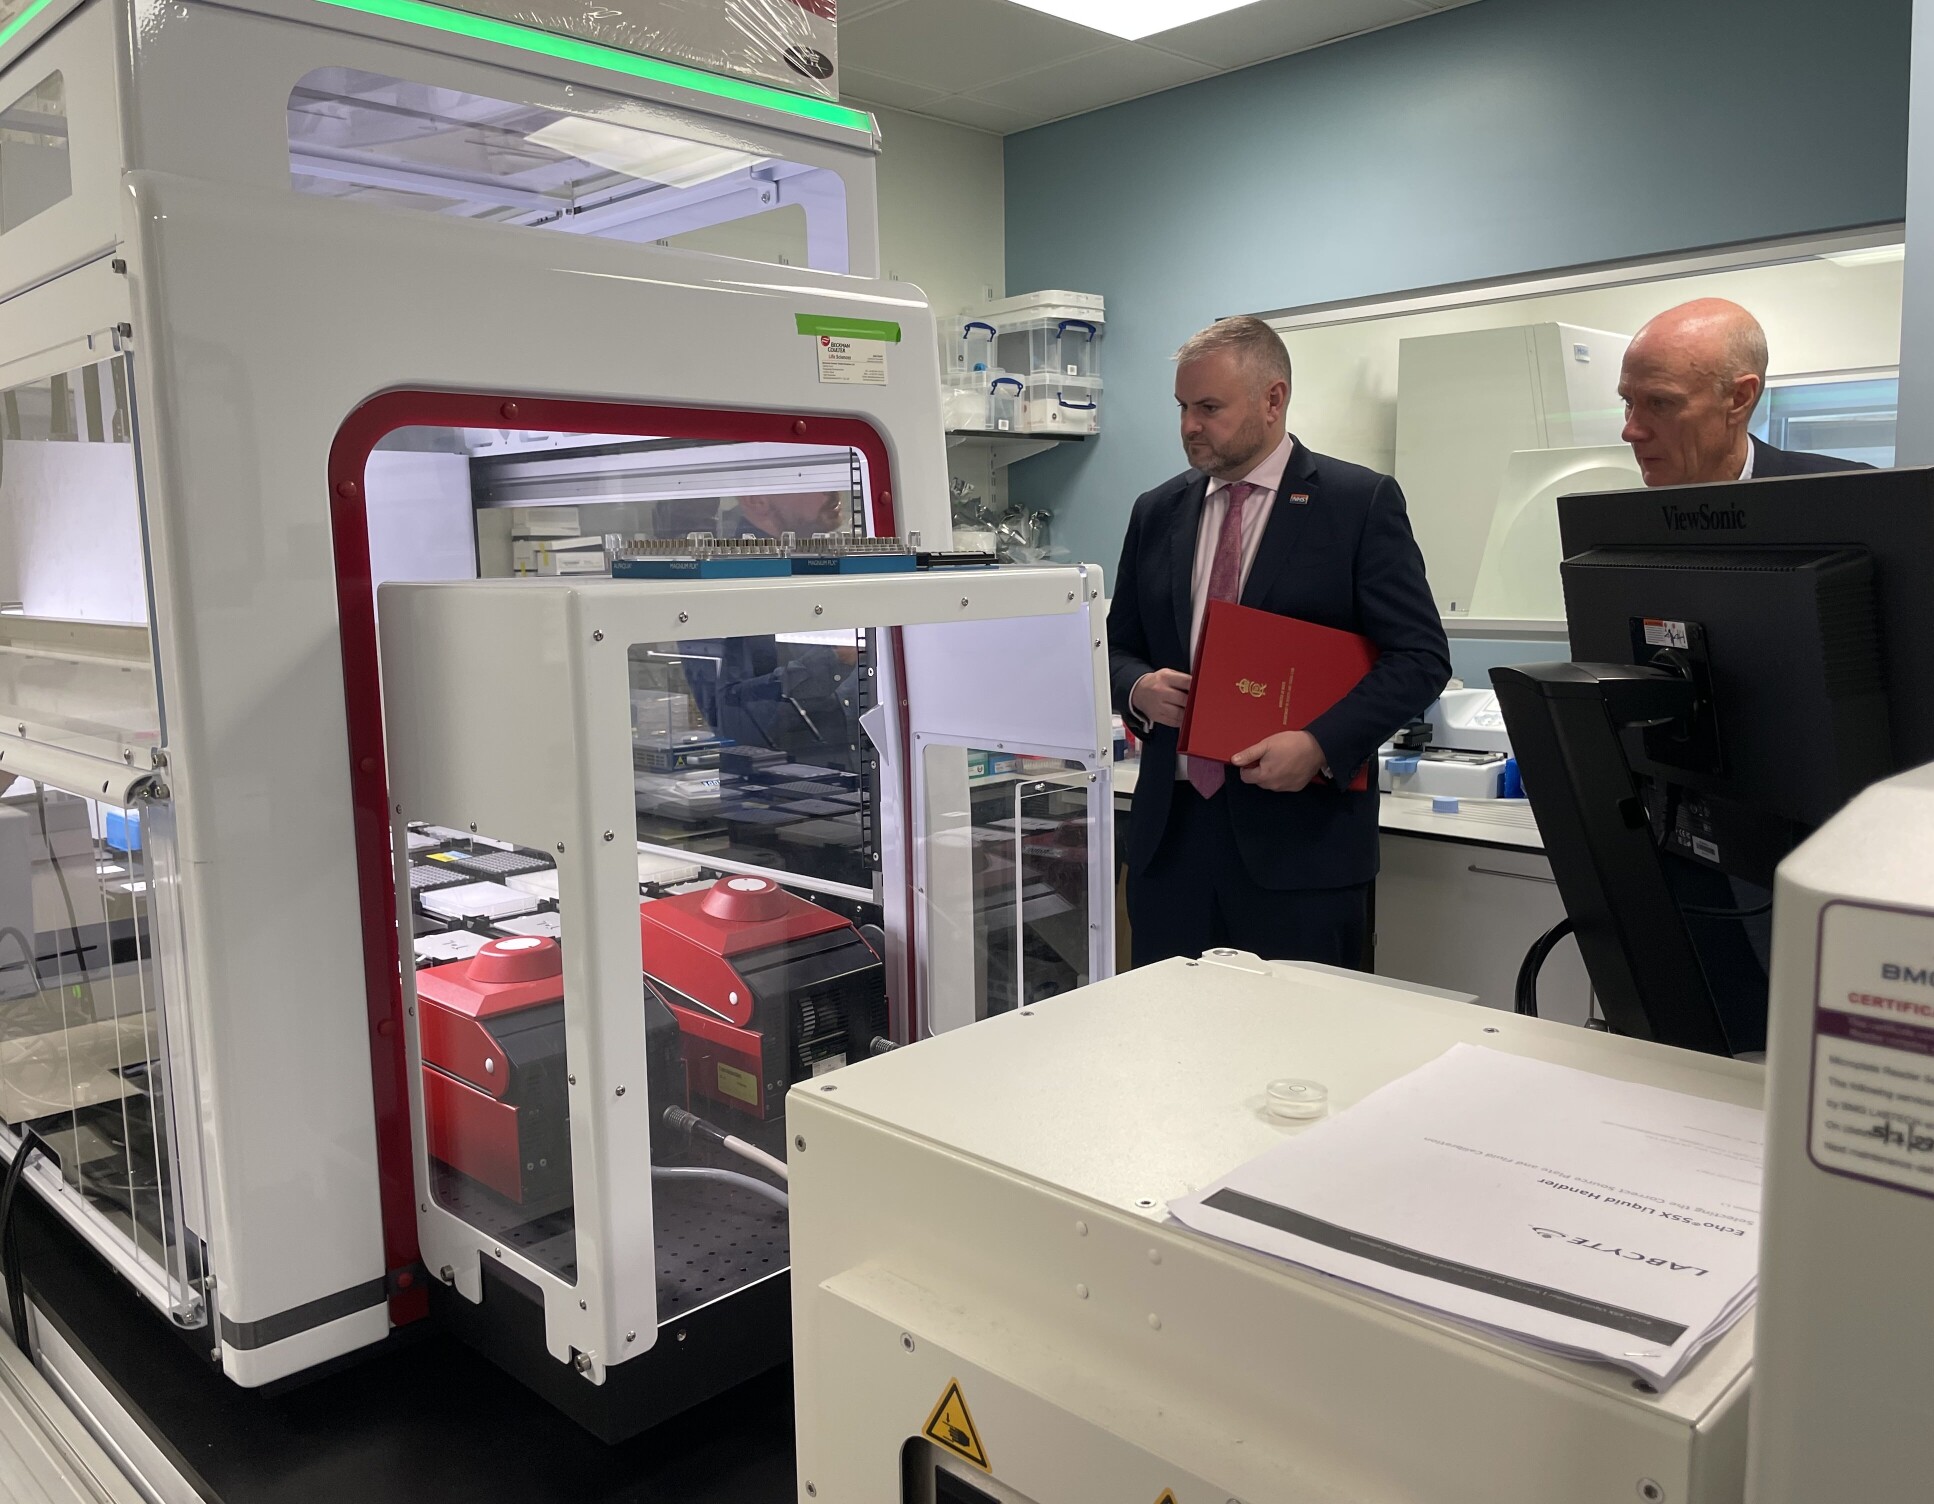 Professor Paul Freemont tours the Minister at the London Biofoundry to see work on synthetic biology applications to detect infections in people living with dementia 